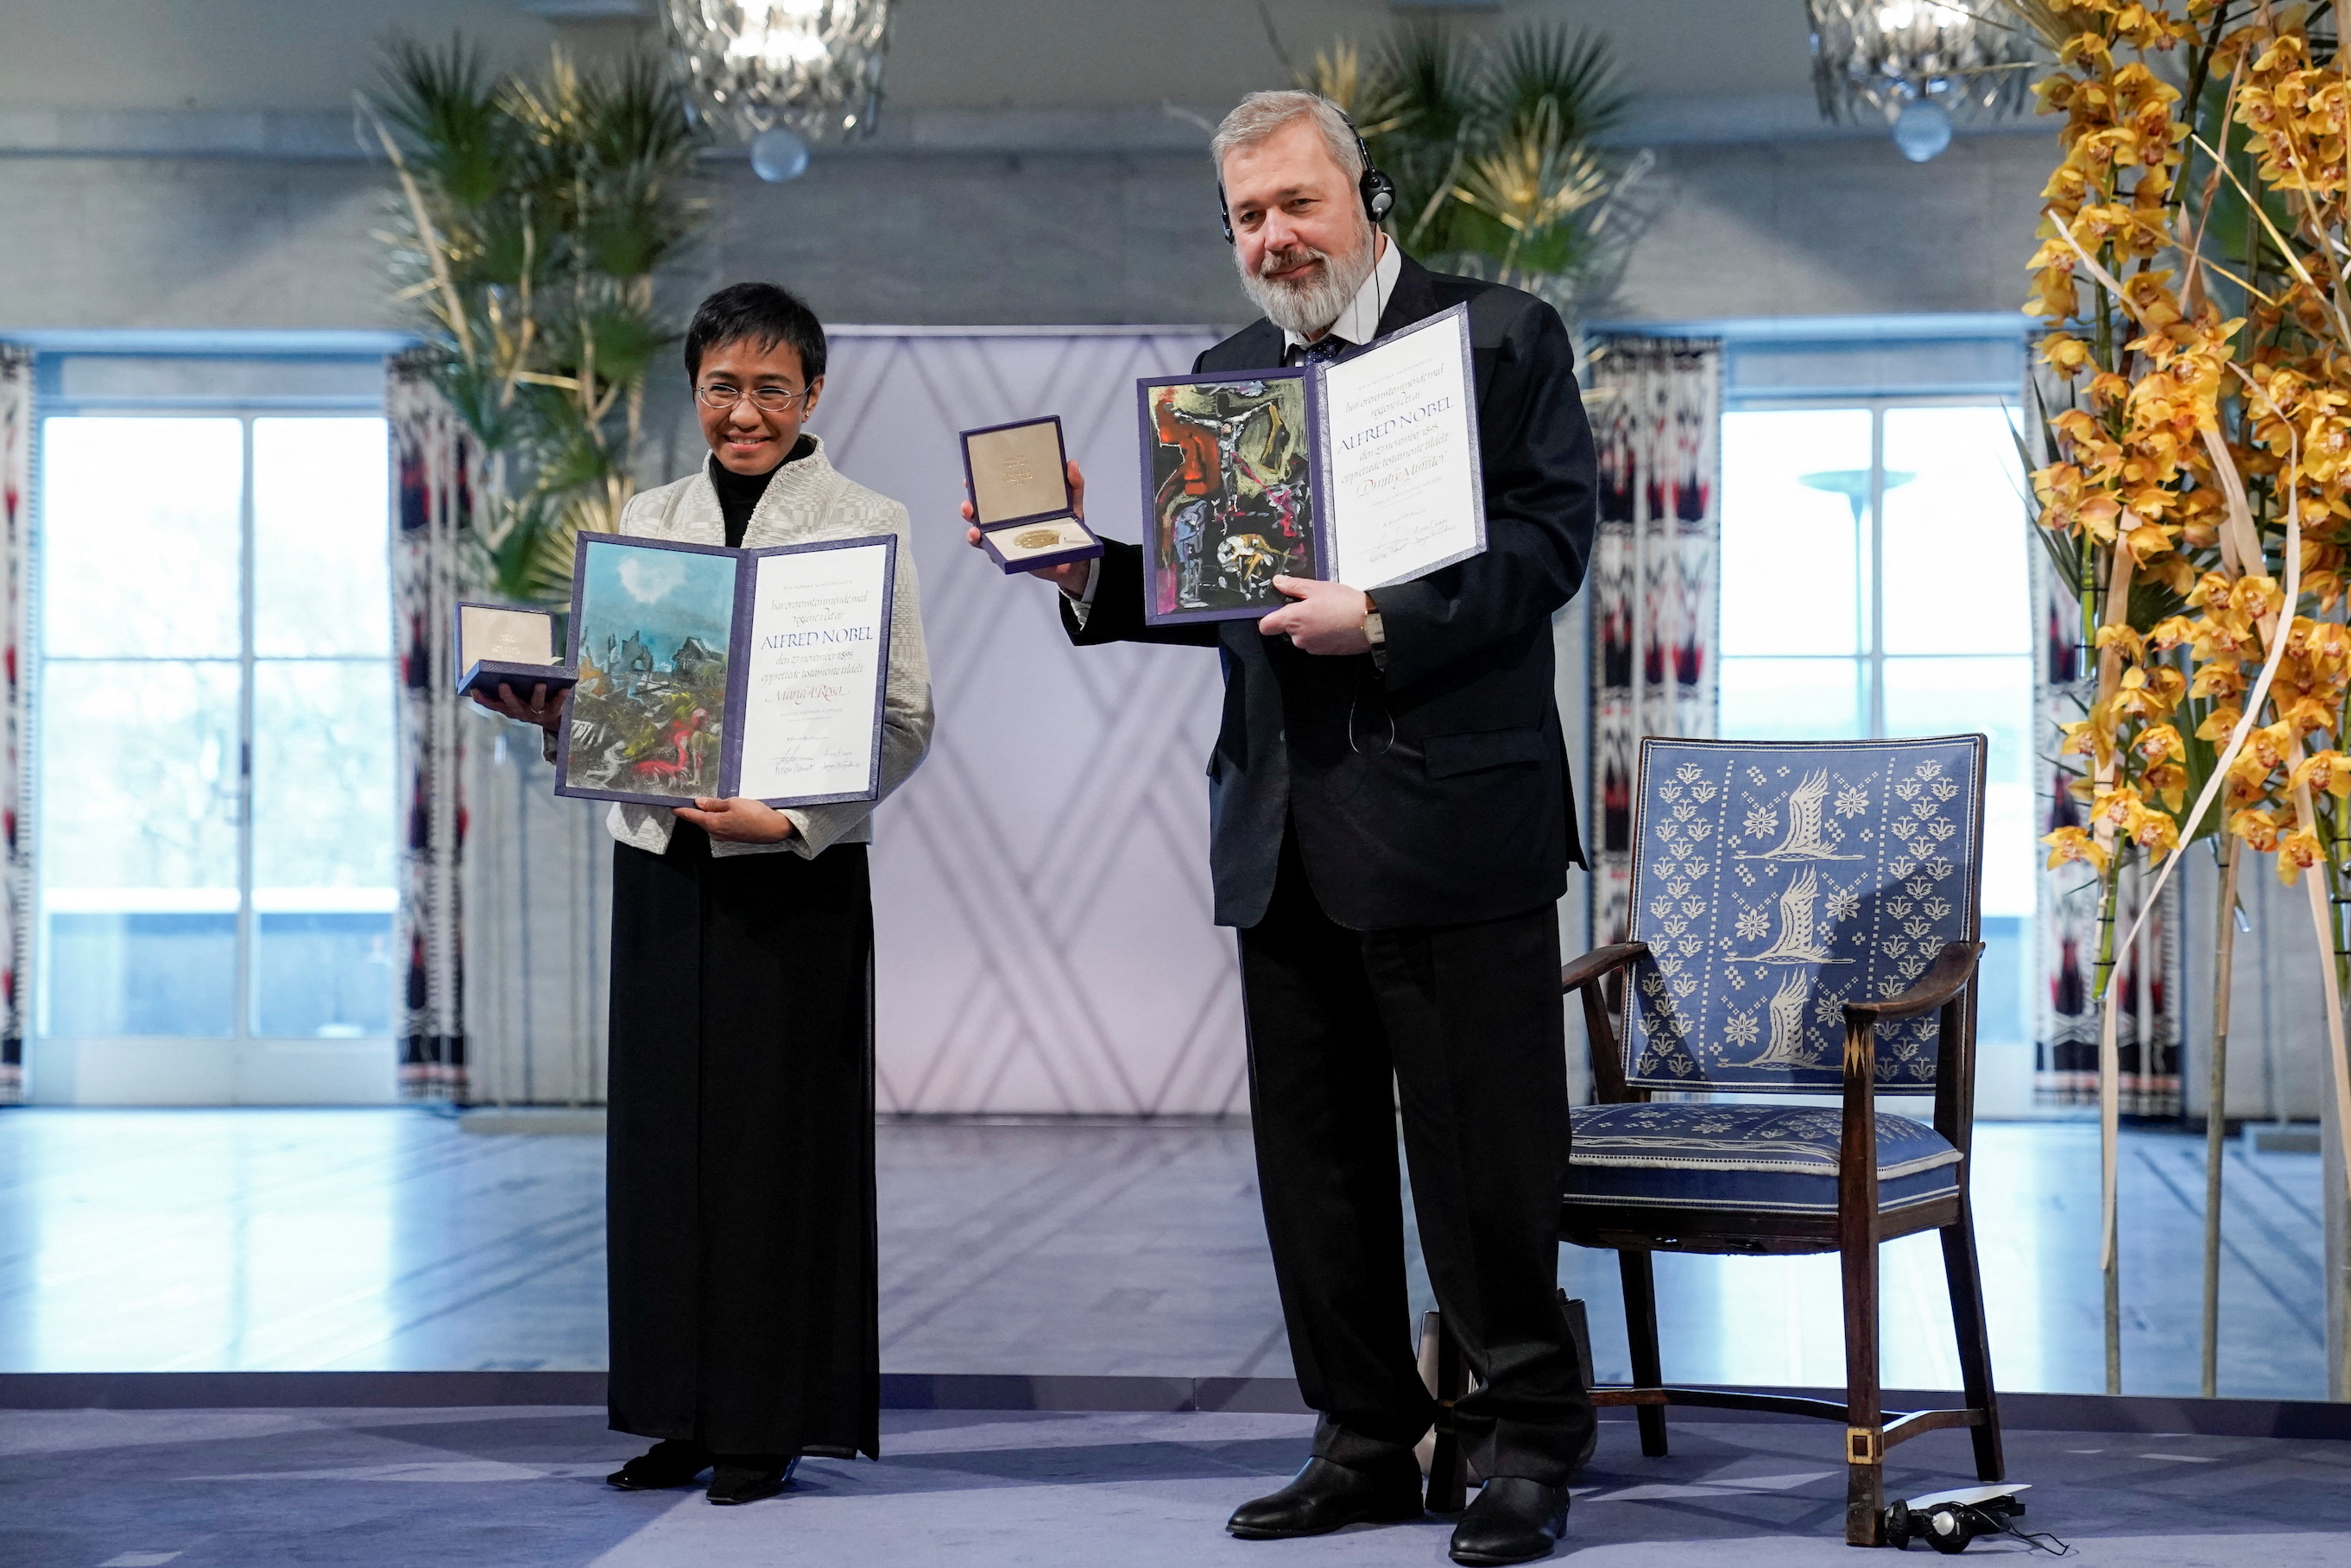 Maria Ressa (left) and Dimtry Muratov (right) pose for a photo during the 2021 Nobel Peace Prize ceremony.Photo credit: The Nobel Peace